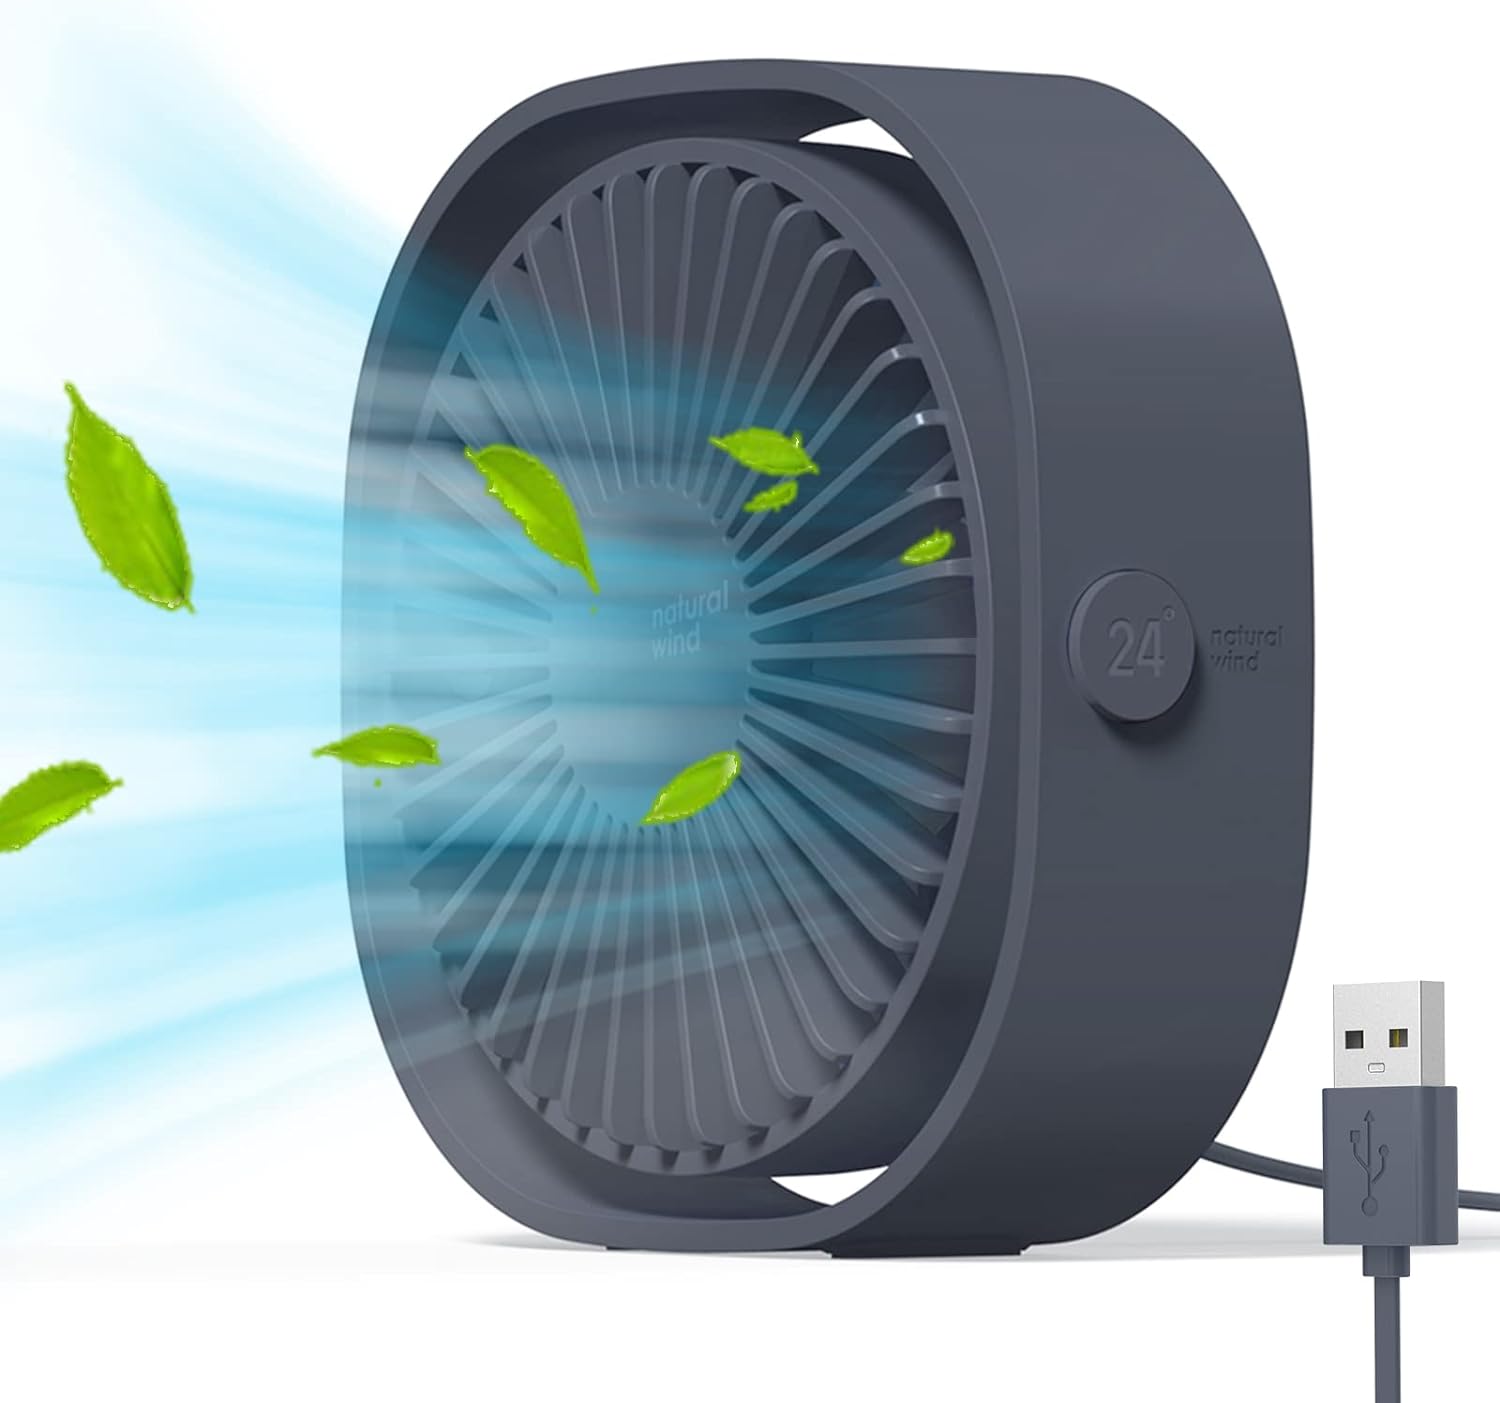 Simpeak Small USB Fan Small Quiet Portable USB Powered ONLY (No Battery), Cooling 3 Speed Setting 360 Adjustable Swivel Desktop Fan Personal Fan for Home Office Bedroom Outdoor Travel Summer, Grey